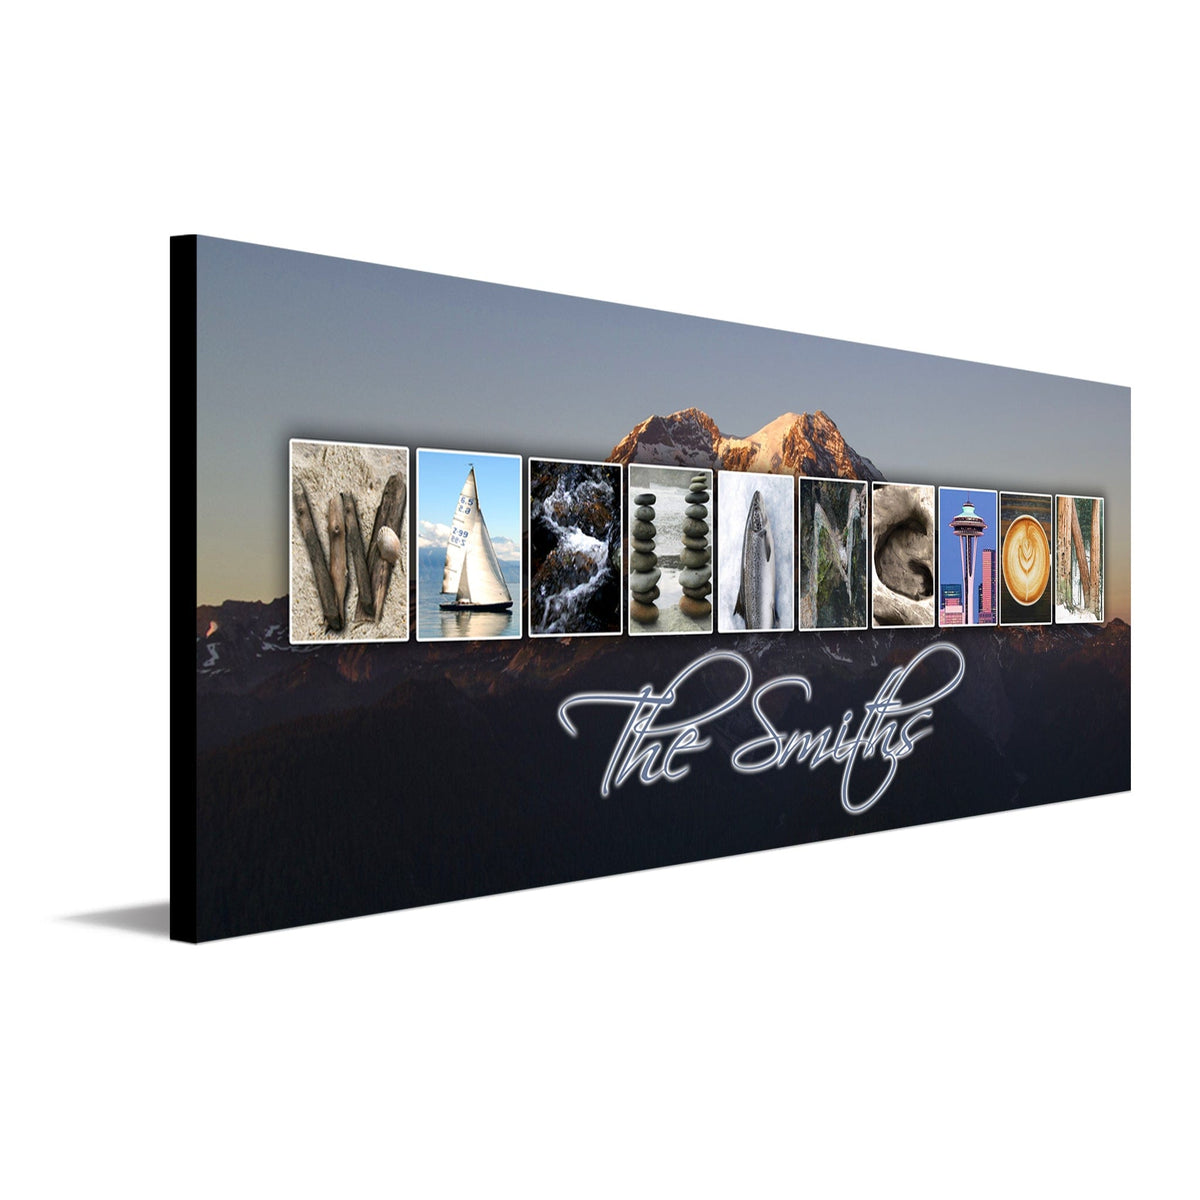 Personalized Washington state gift using images from the state to spell the word Washington - Personal-Prints